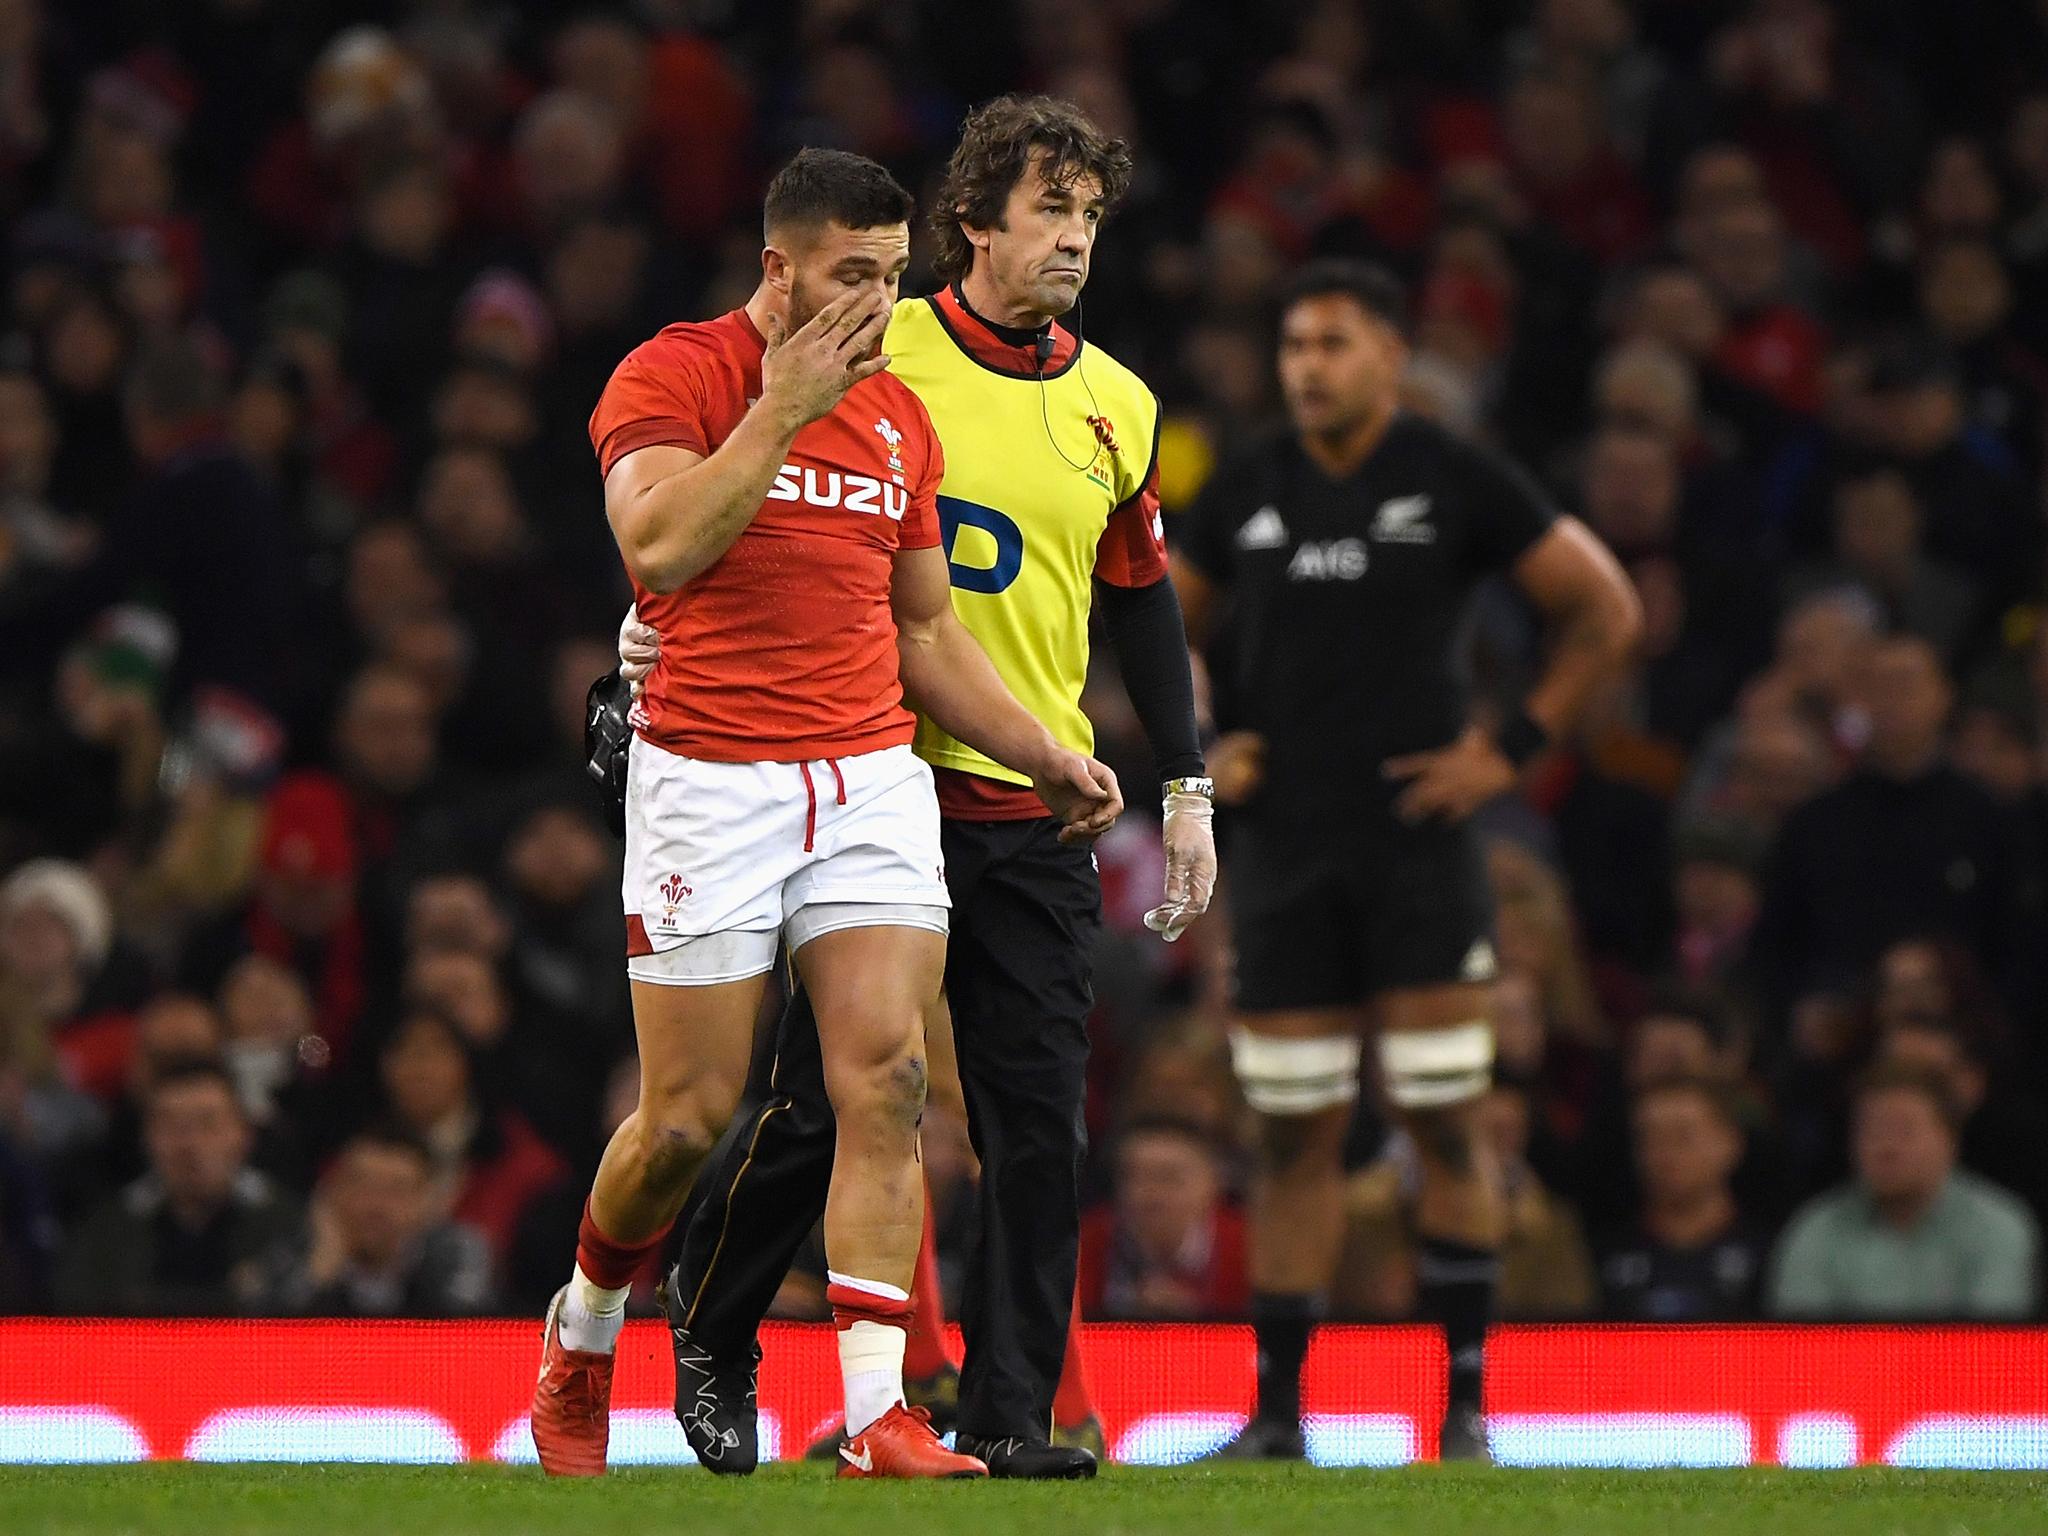 Rhys Webb has been ruled out of the Six Nations with a knee injury